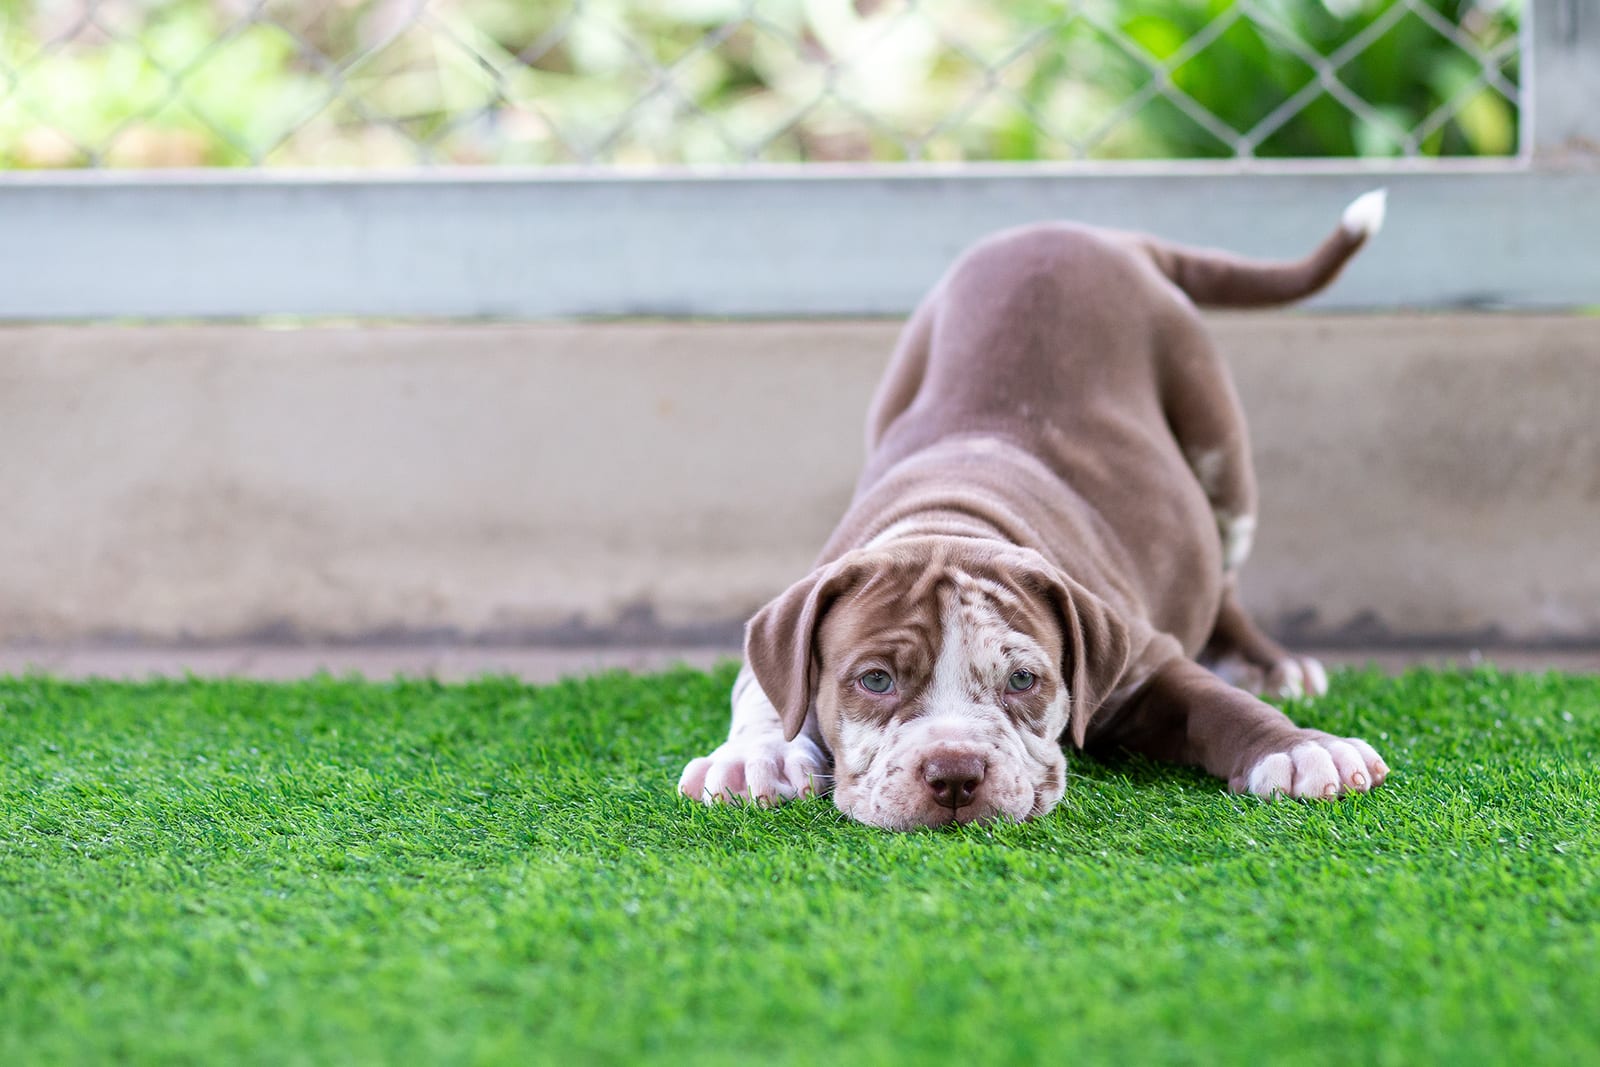 Adorable brown puppy playing on turf in enclosed area with blue fence